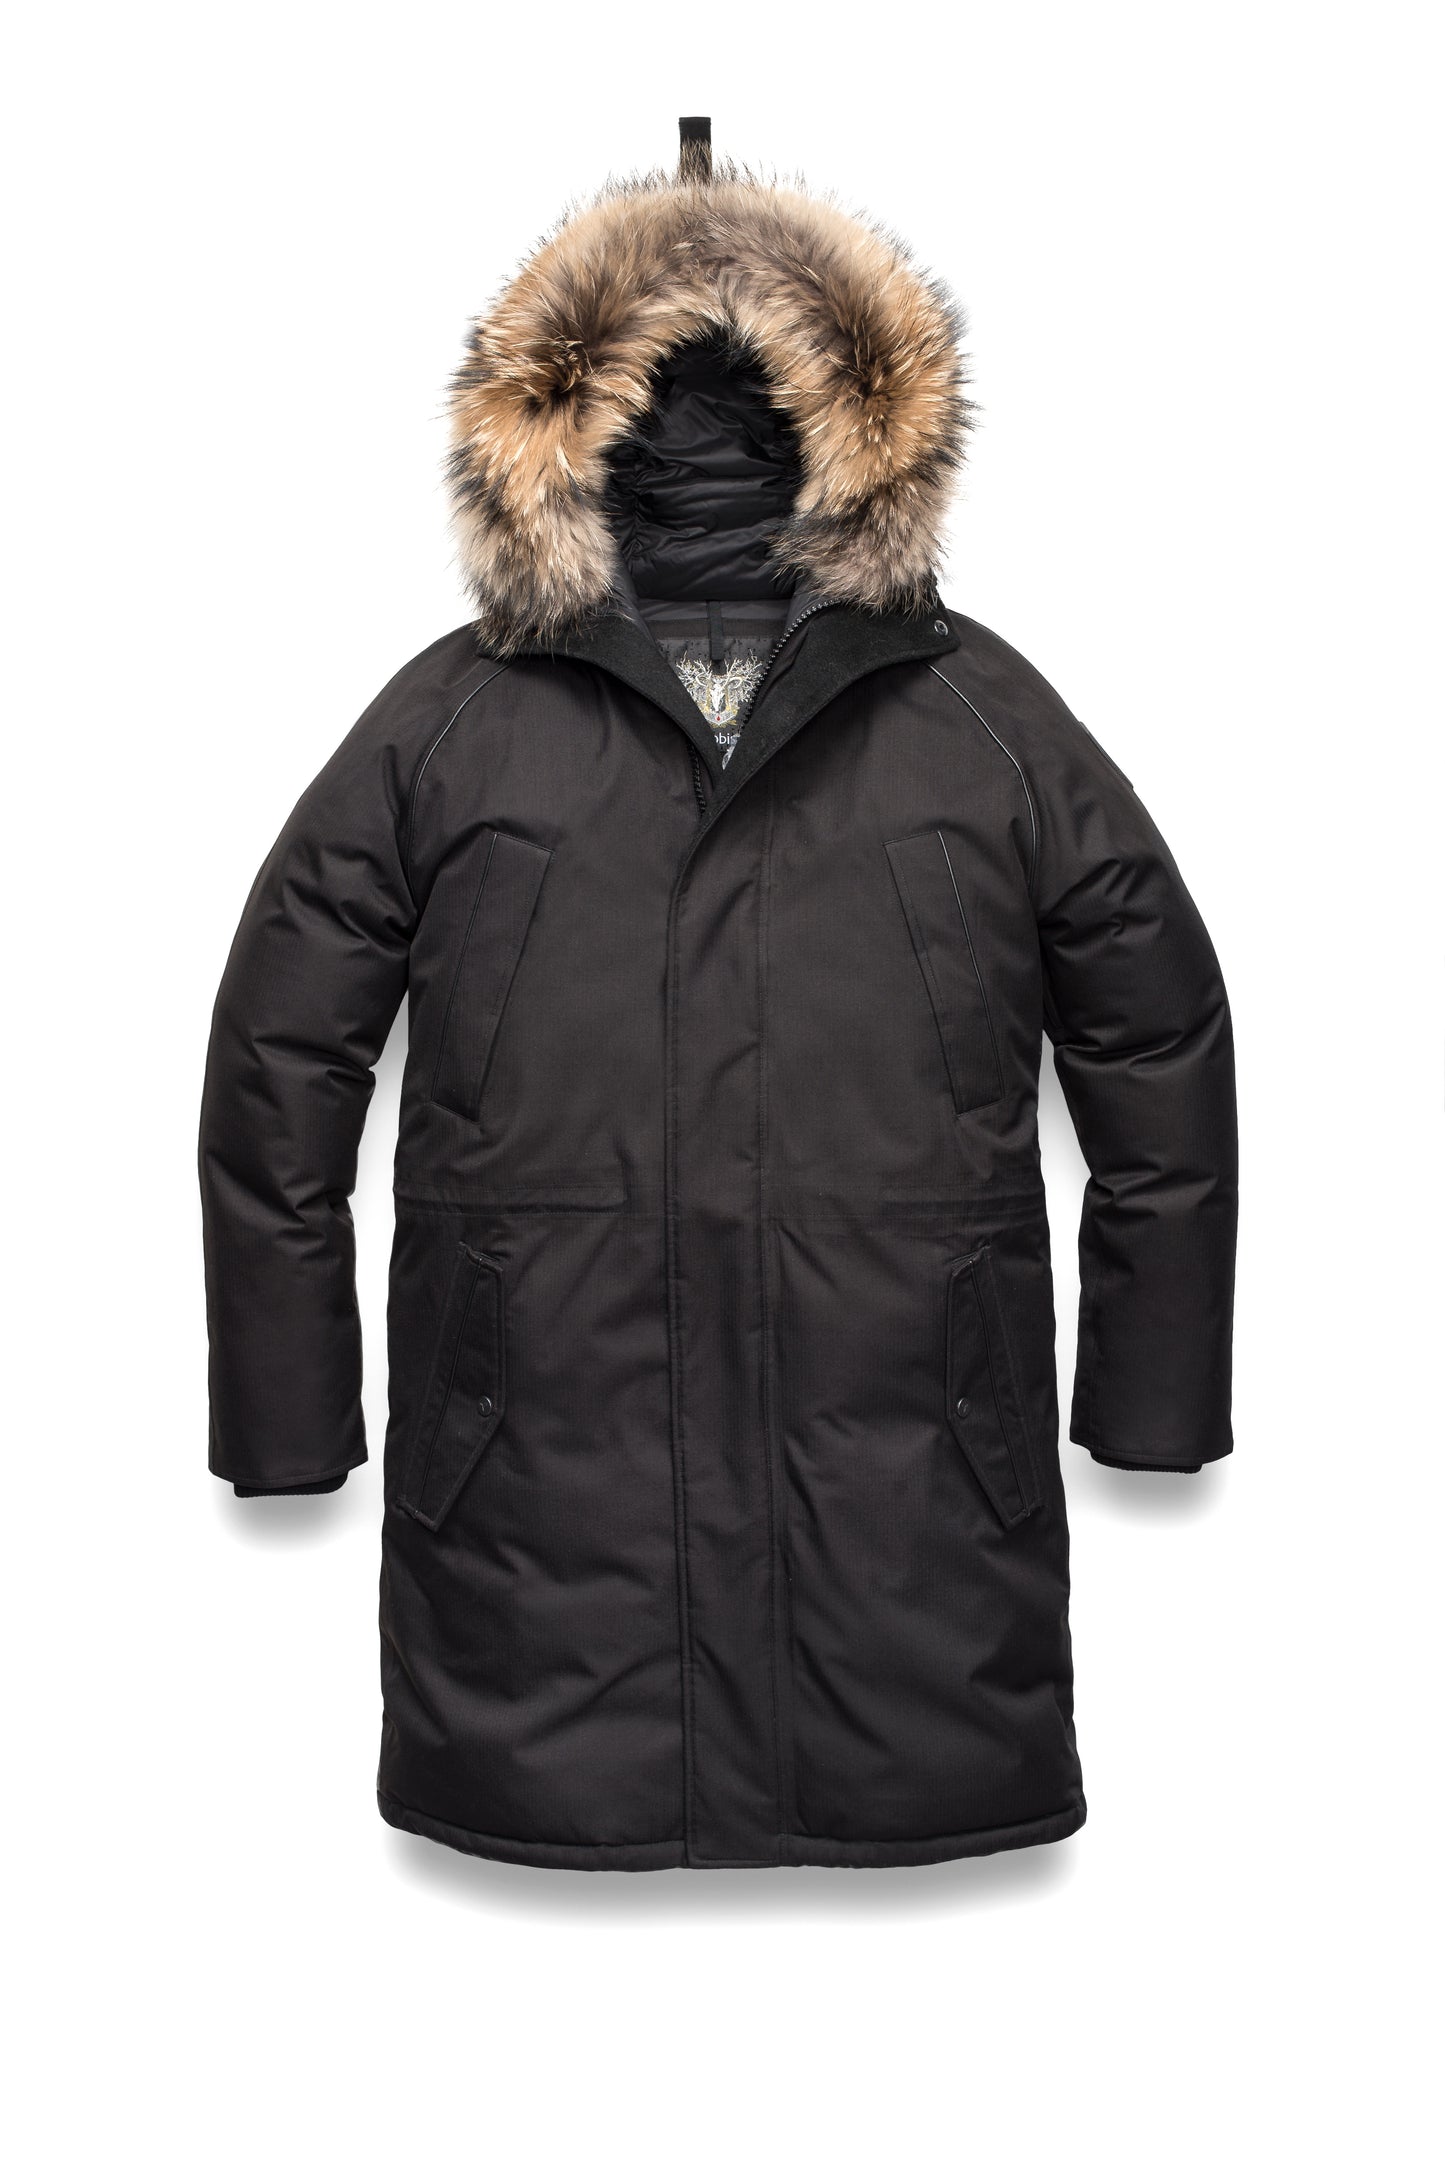 Men's knee length down-filled parka with four exterior pockets and a non-removable hood with detachable fur trim in Black